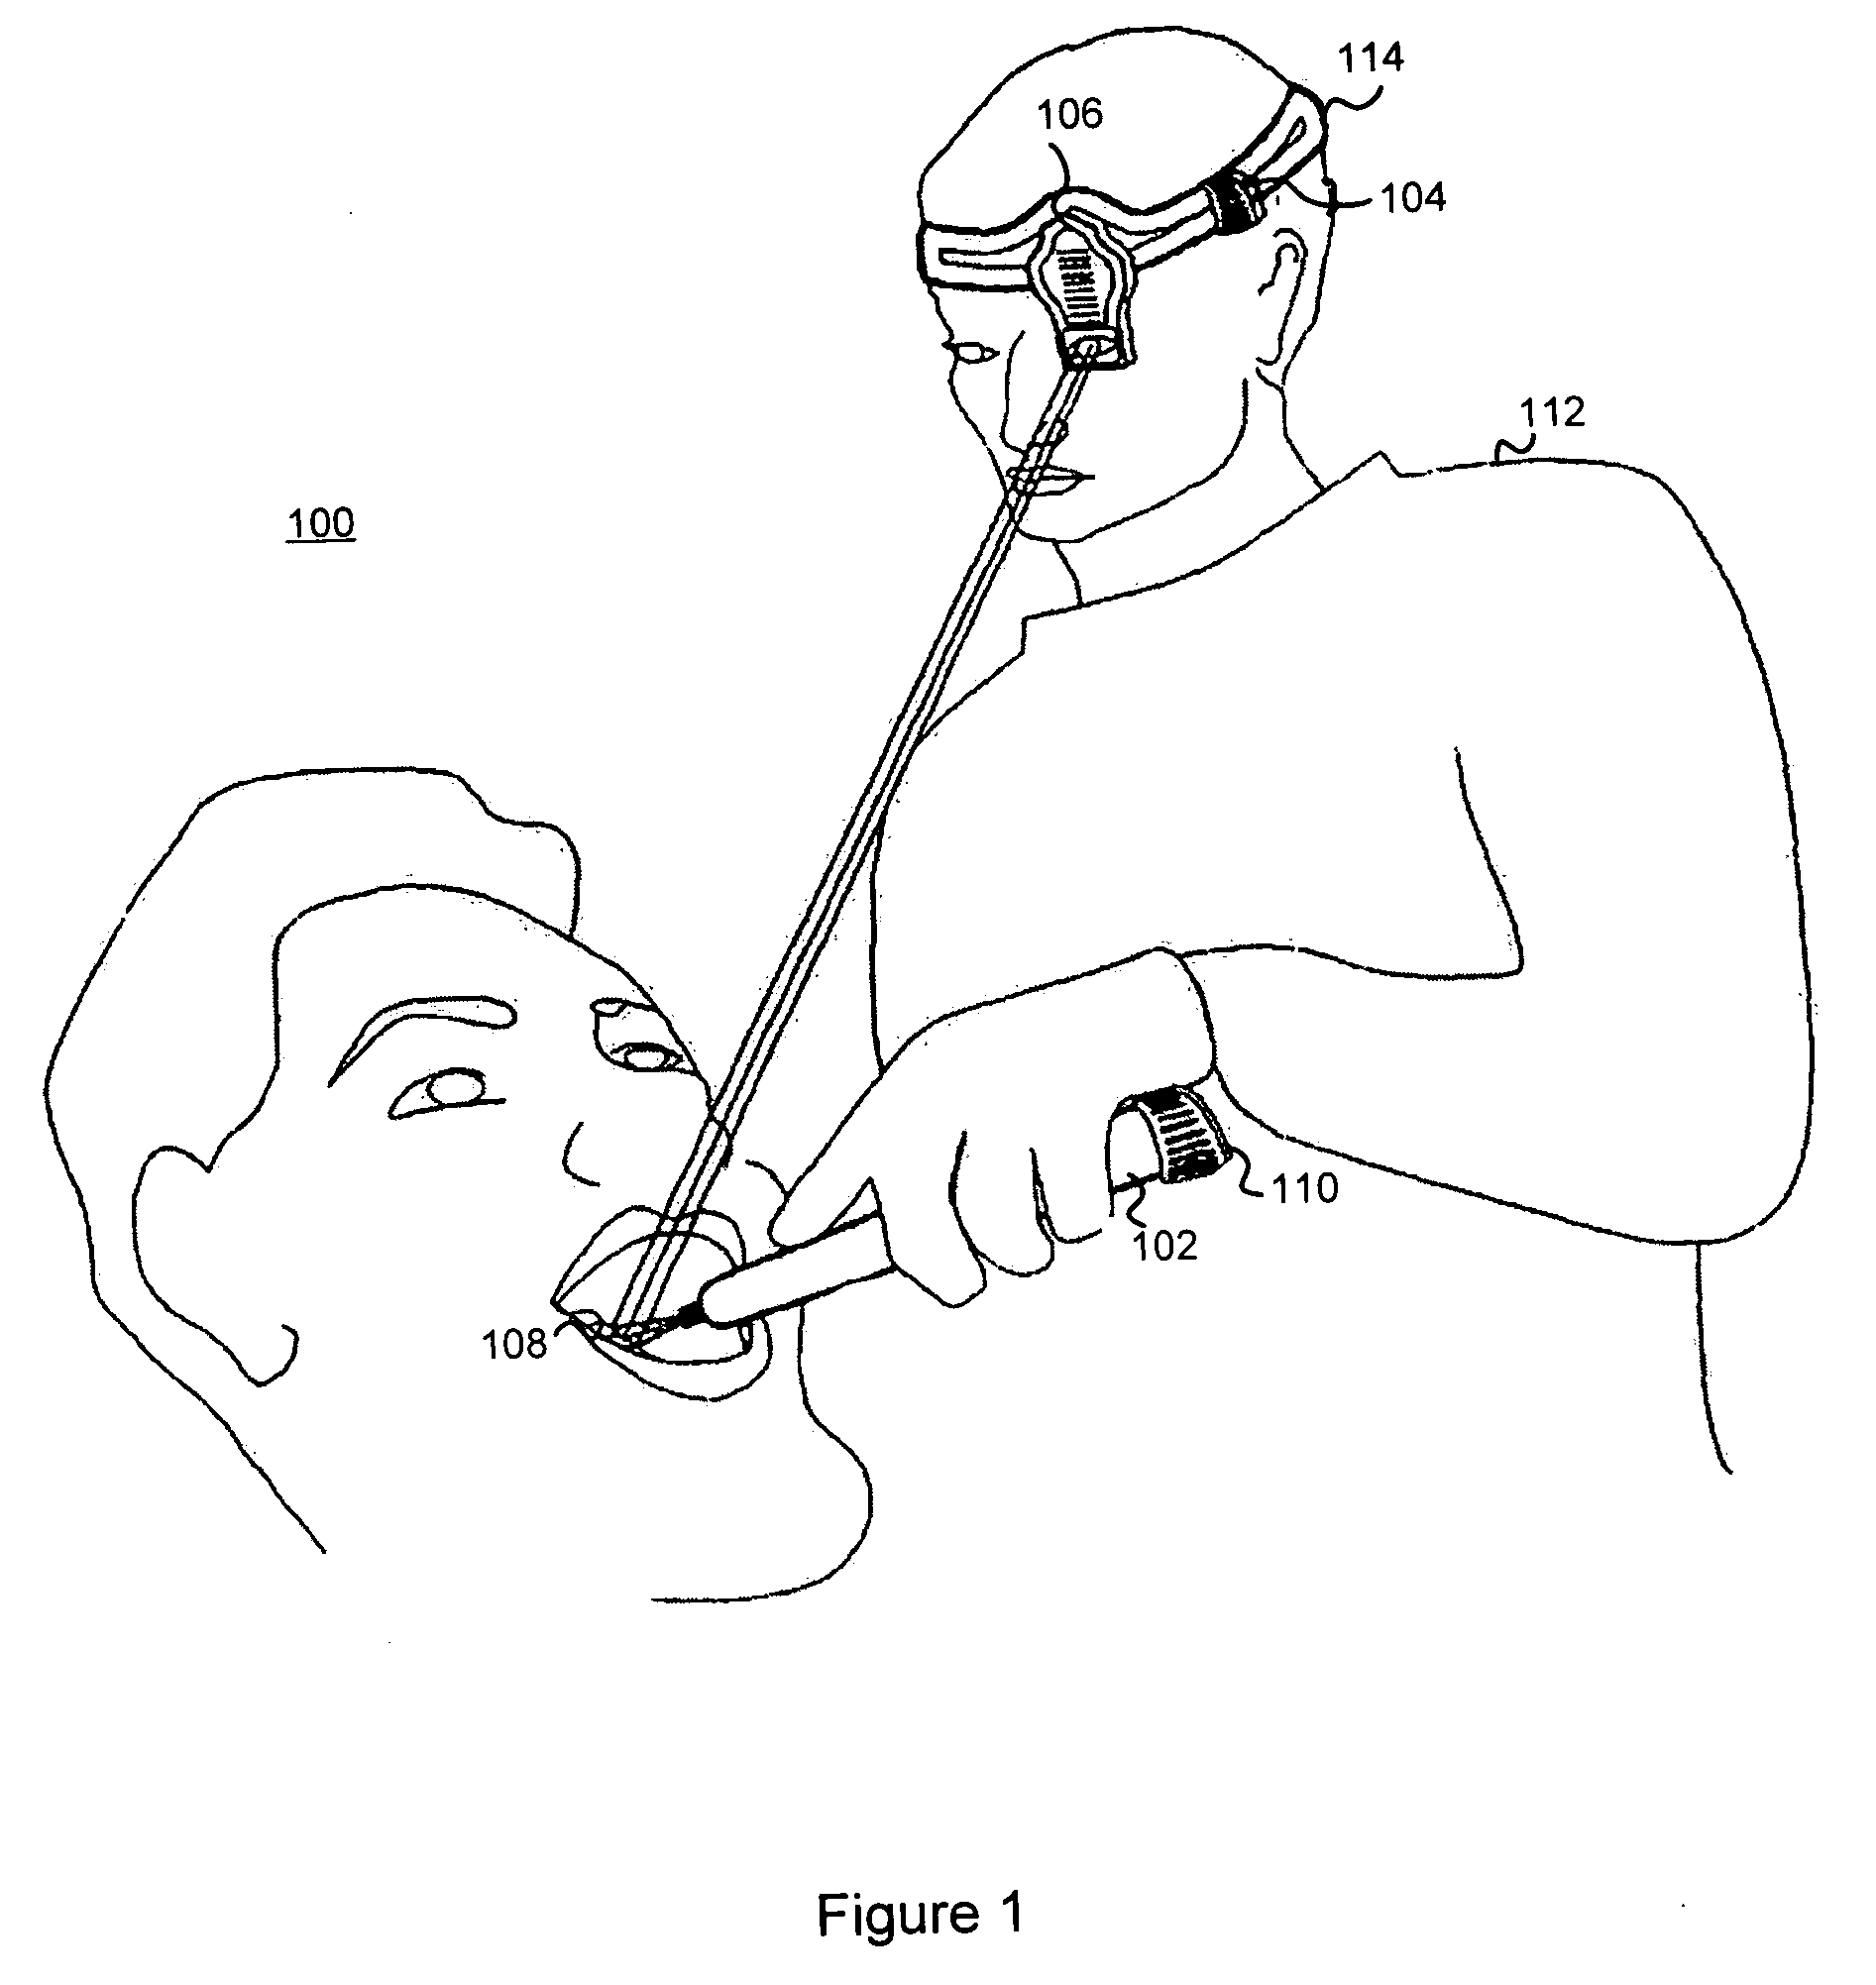 Intra-oral imaging system